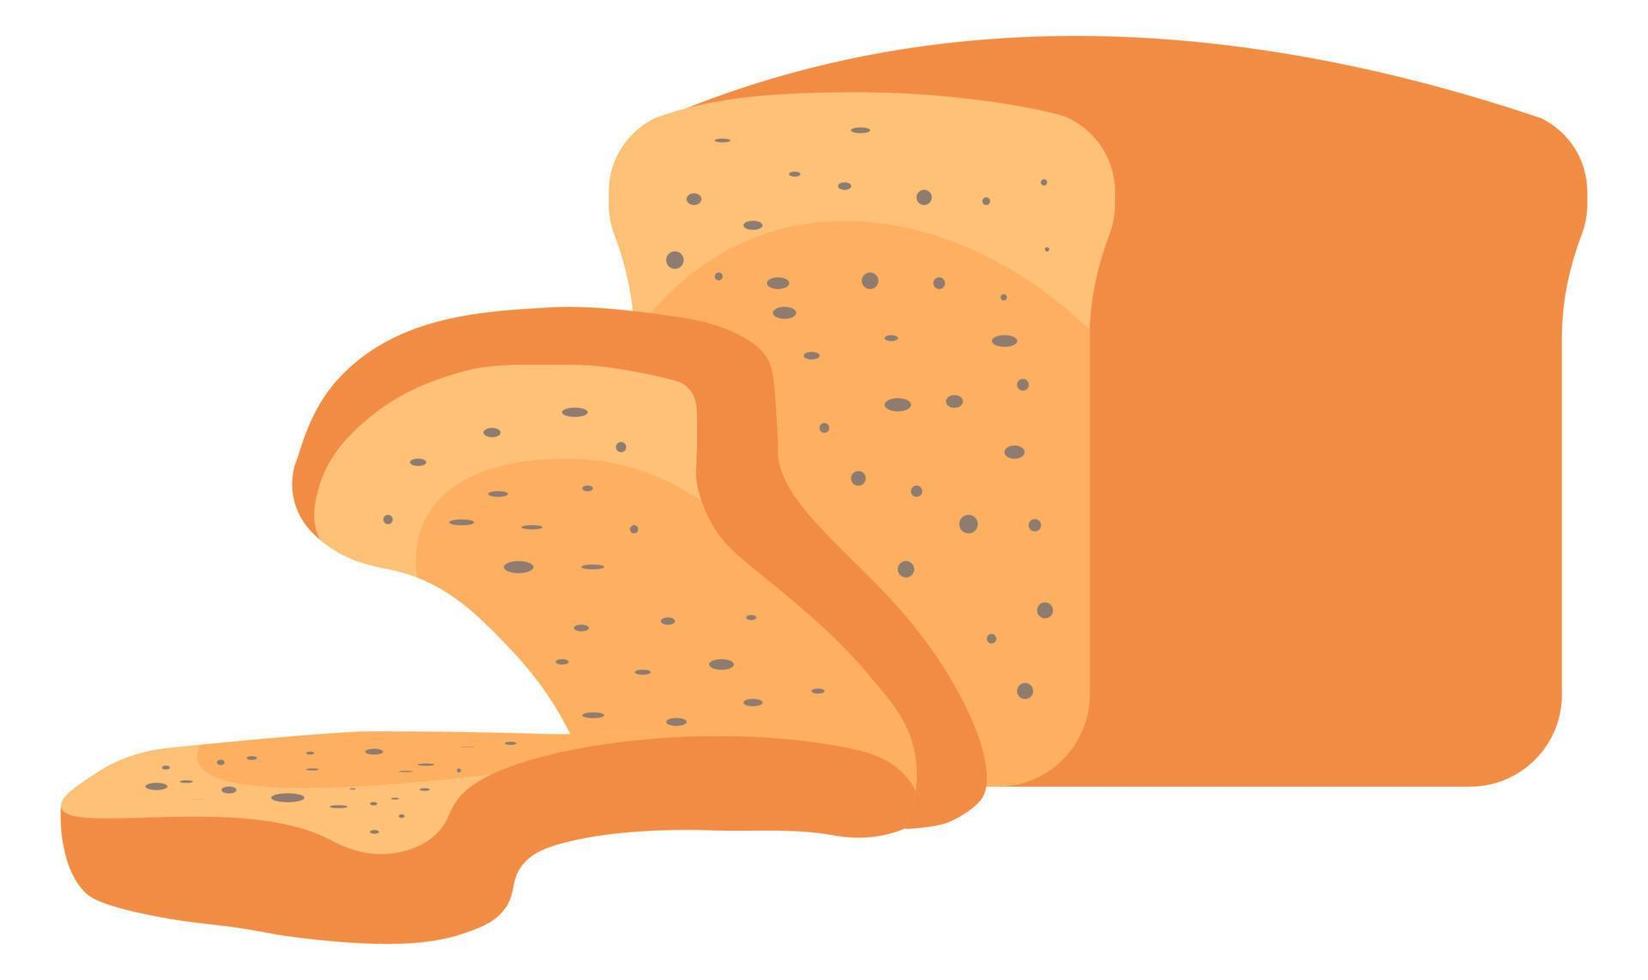 Sliced loaf of bread, baked healthy product vector